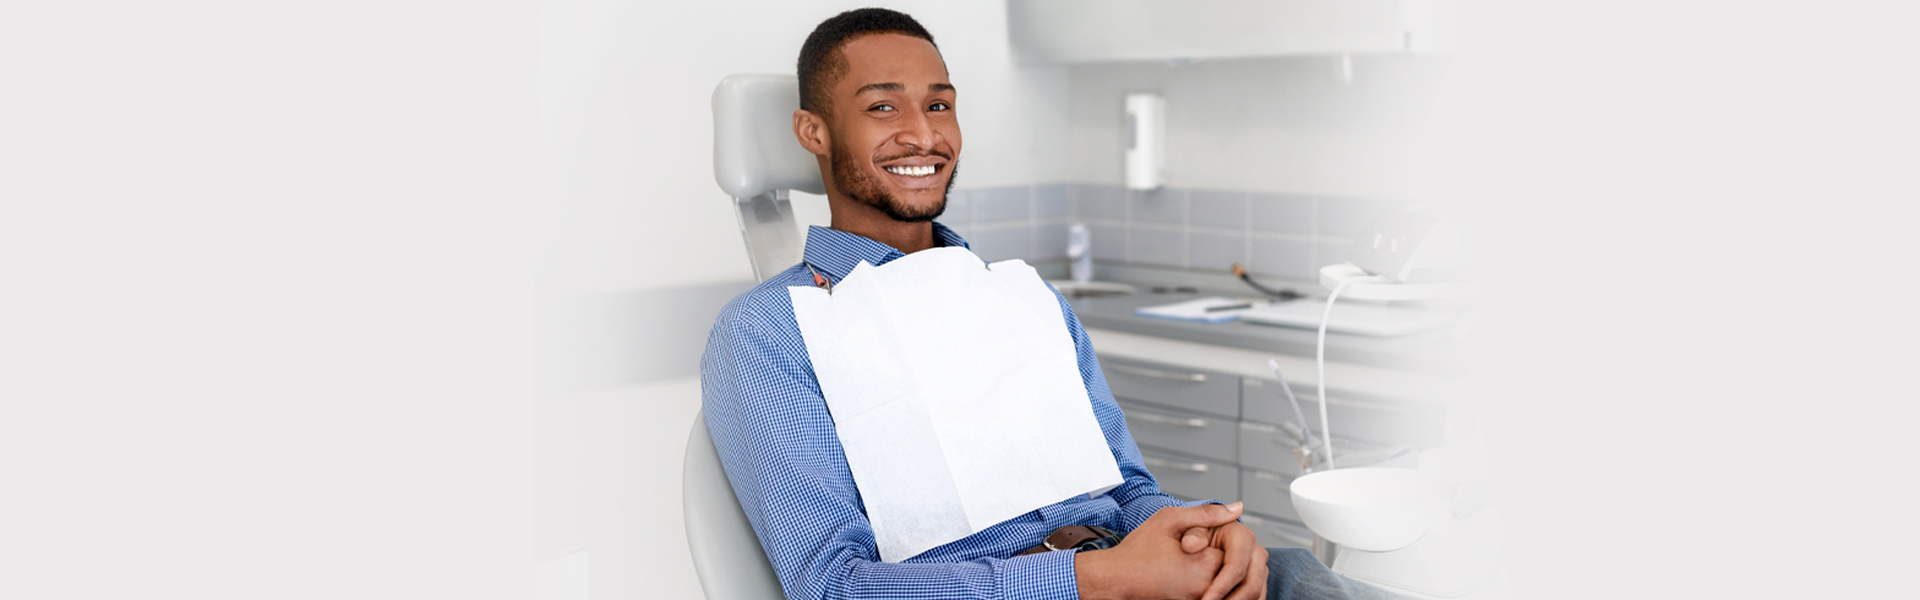 How to Prepare For Dental Hygienist Treatment